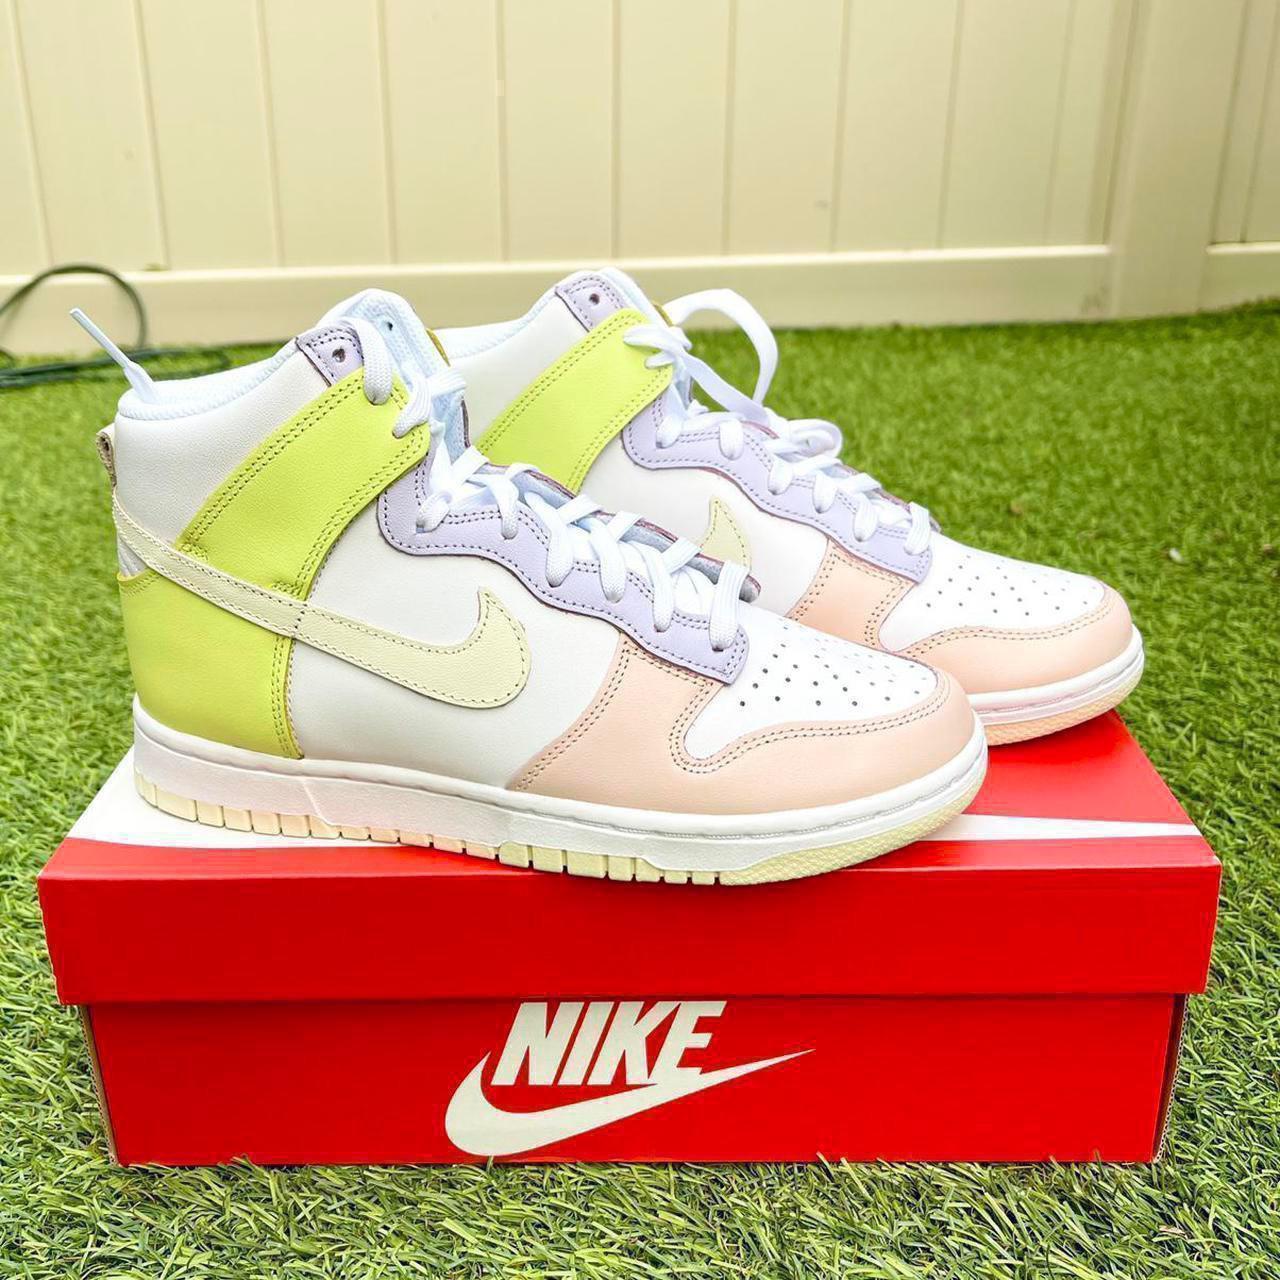 Product Image 4 - Nike Dunk high pastel GS

Brand